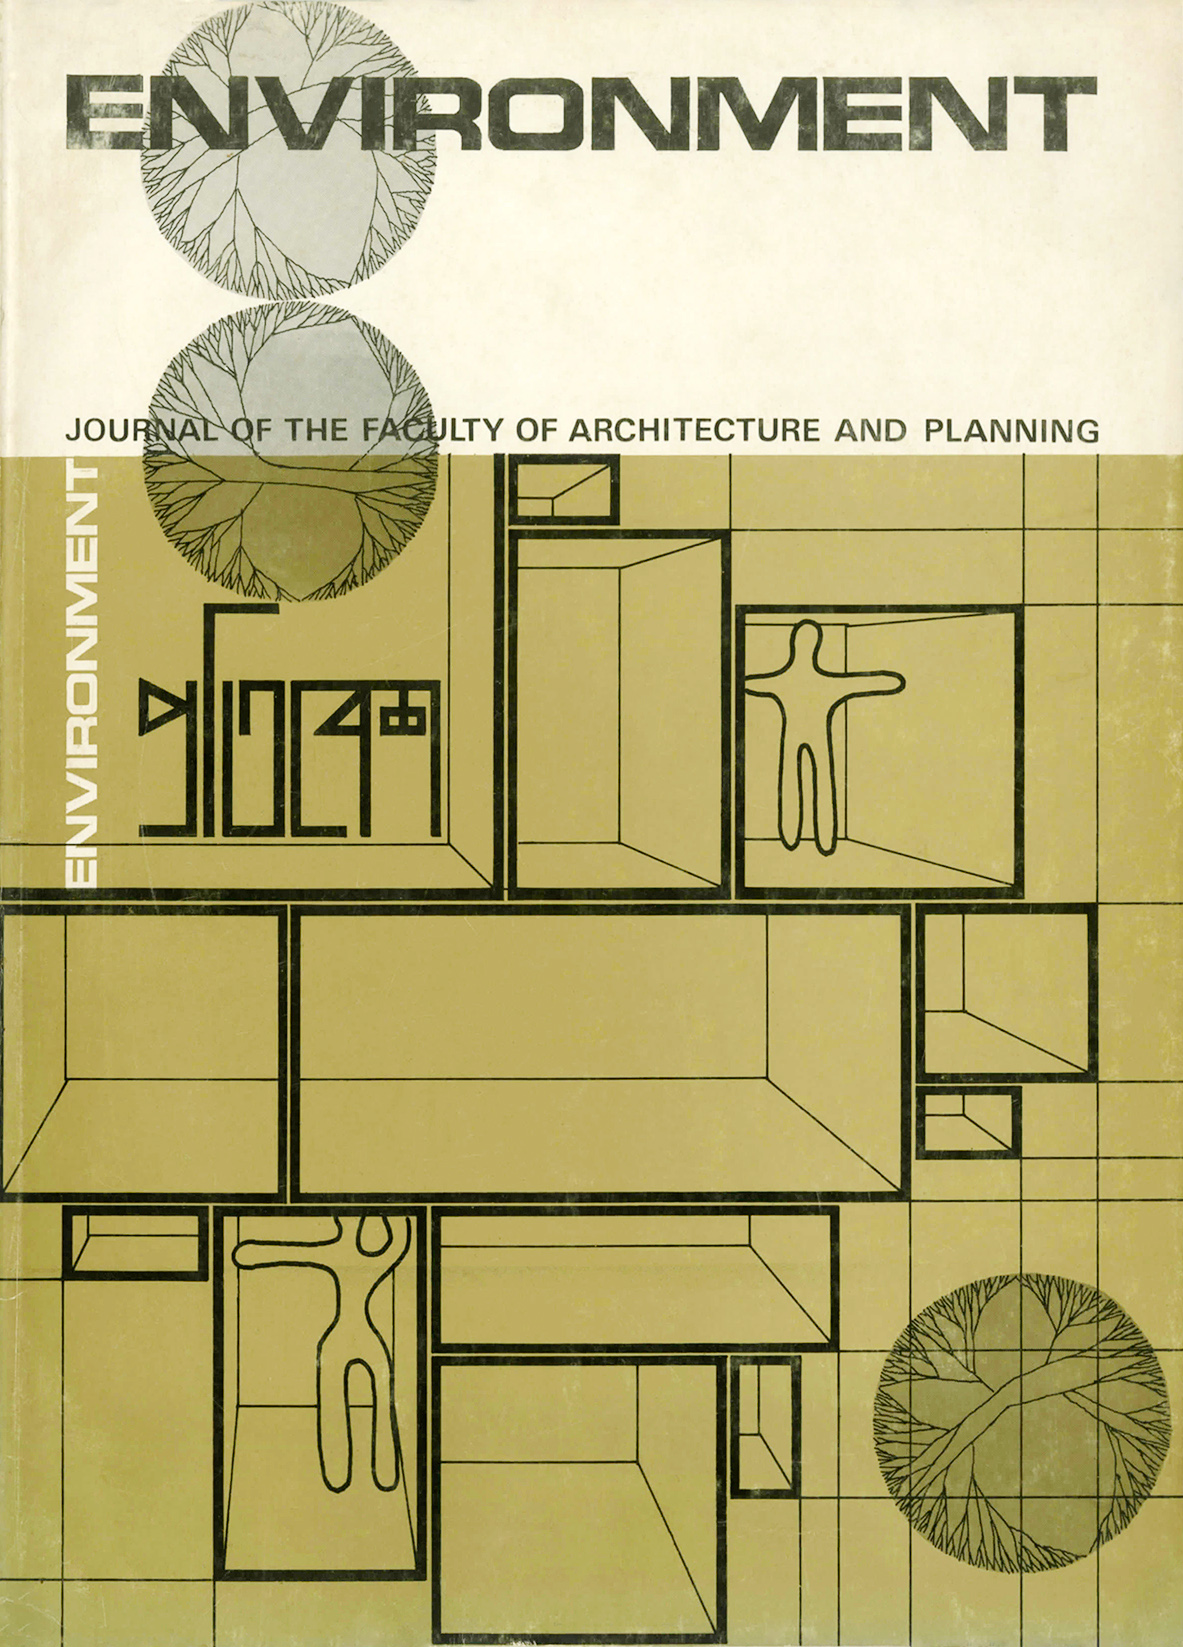 Cover image of Protibesh Vol-02 No-01 June-1987 - Journal of the Department of Architecture, BUET